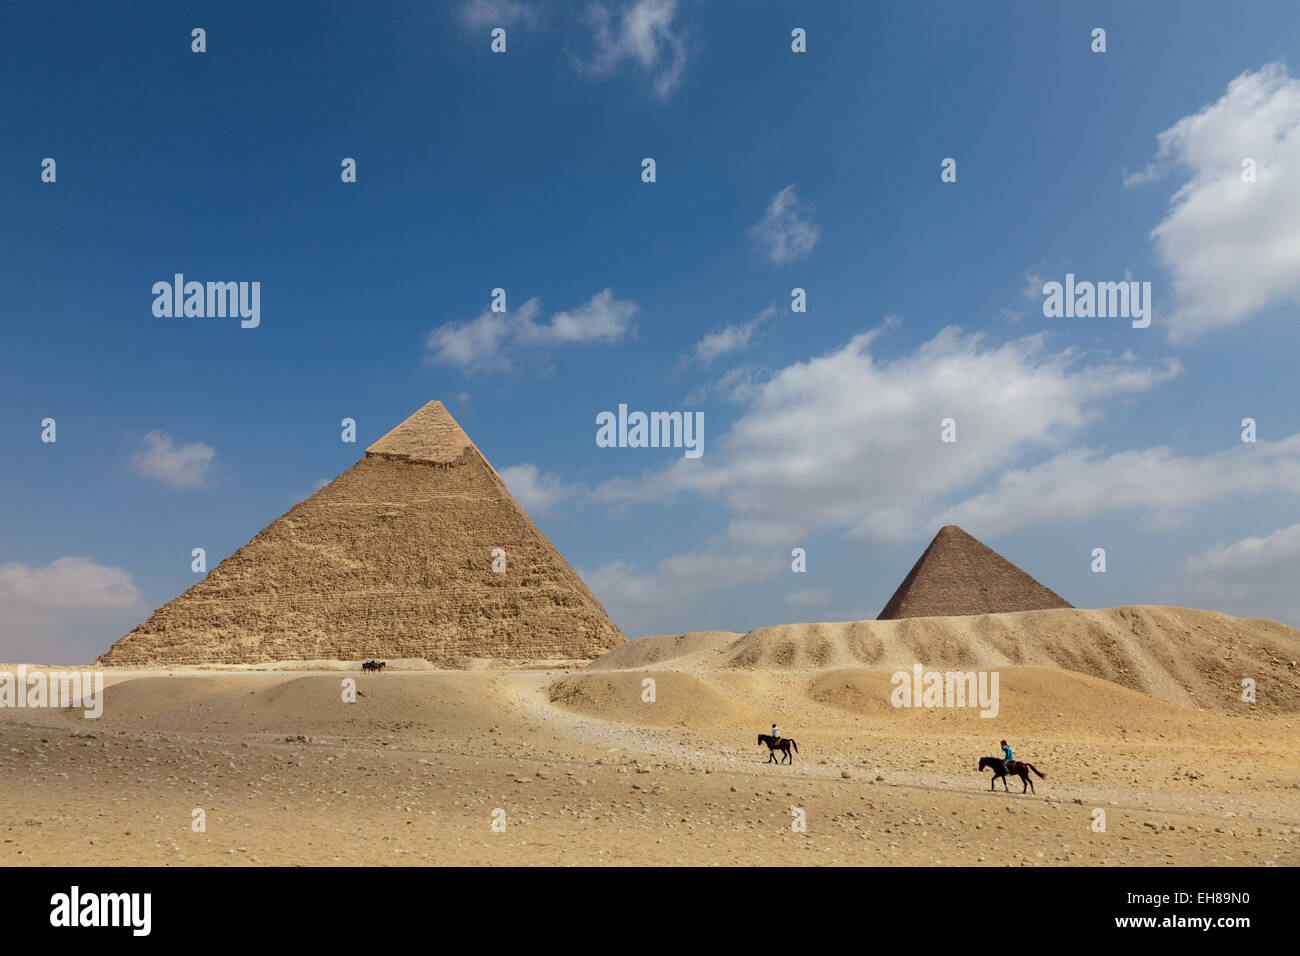 The Pyramid Of Khafre And The Great Pyramid In Giza Unesco World